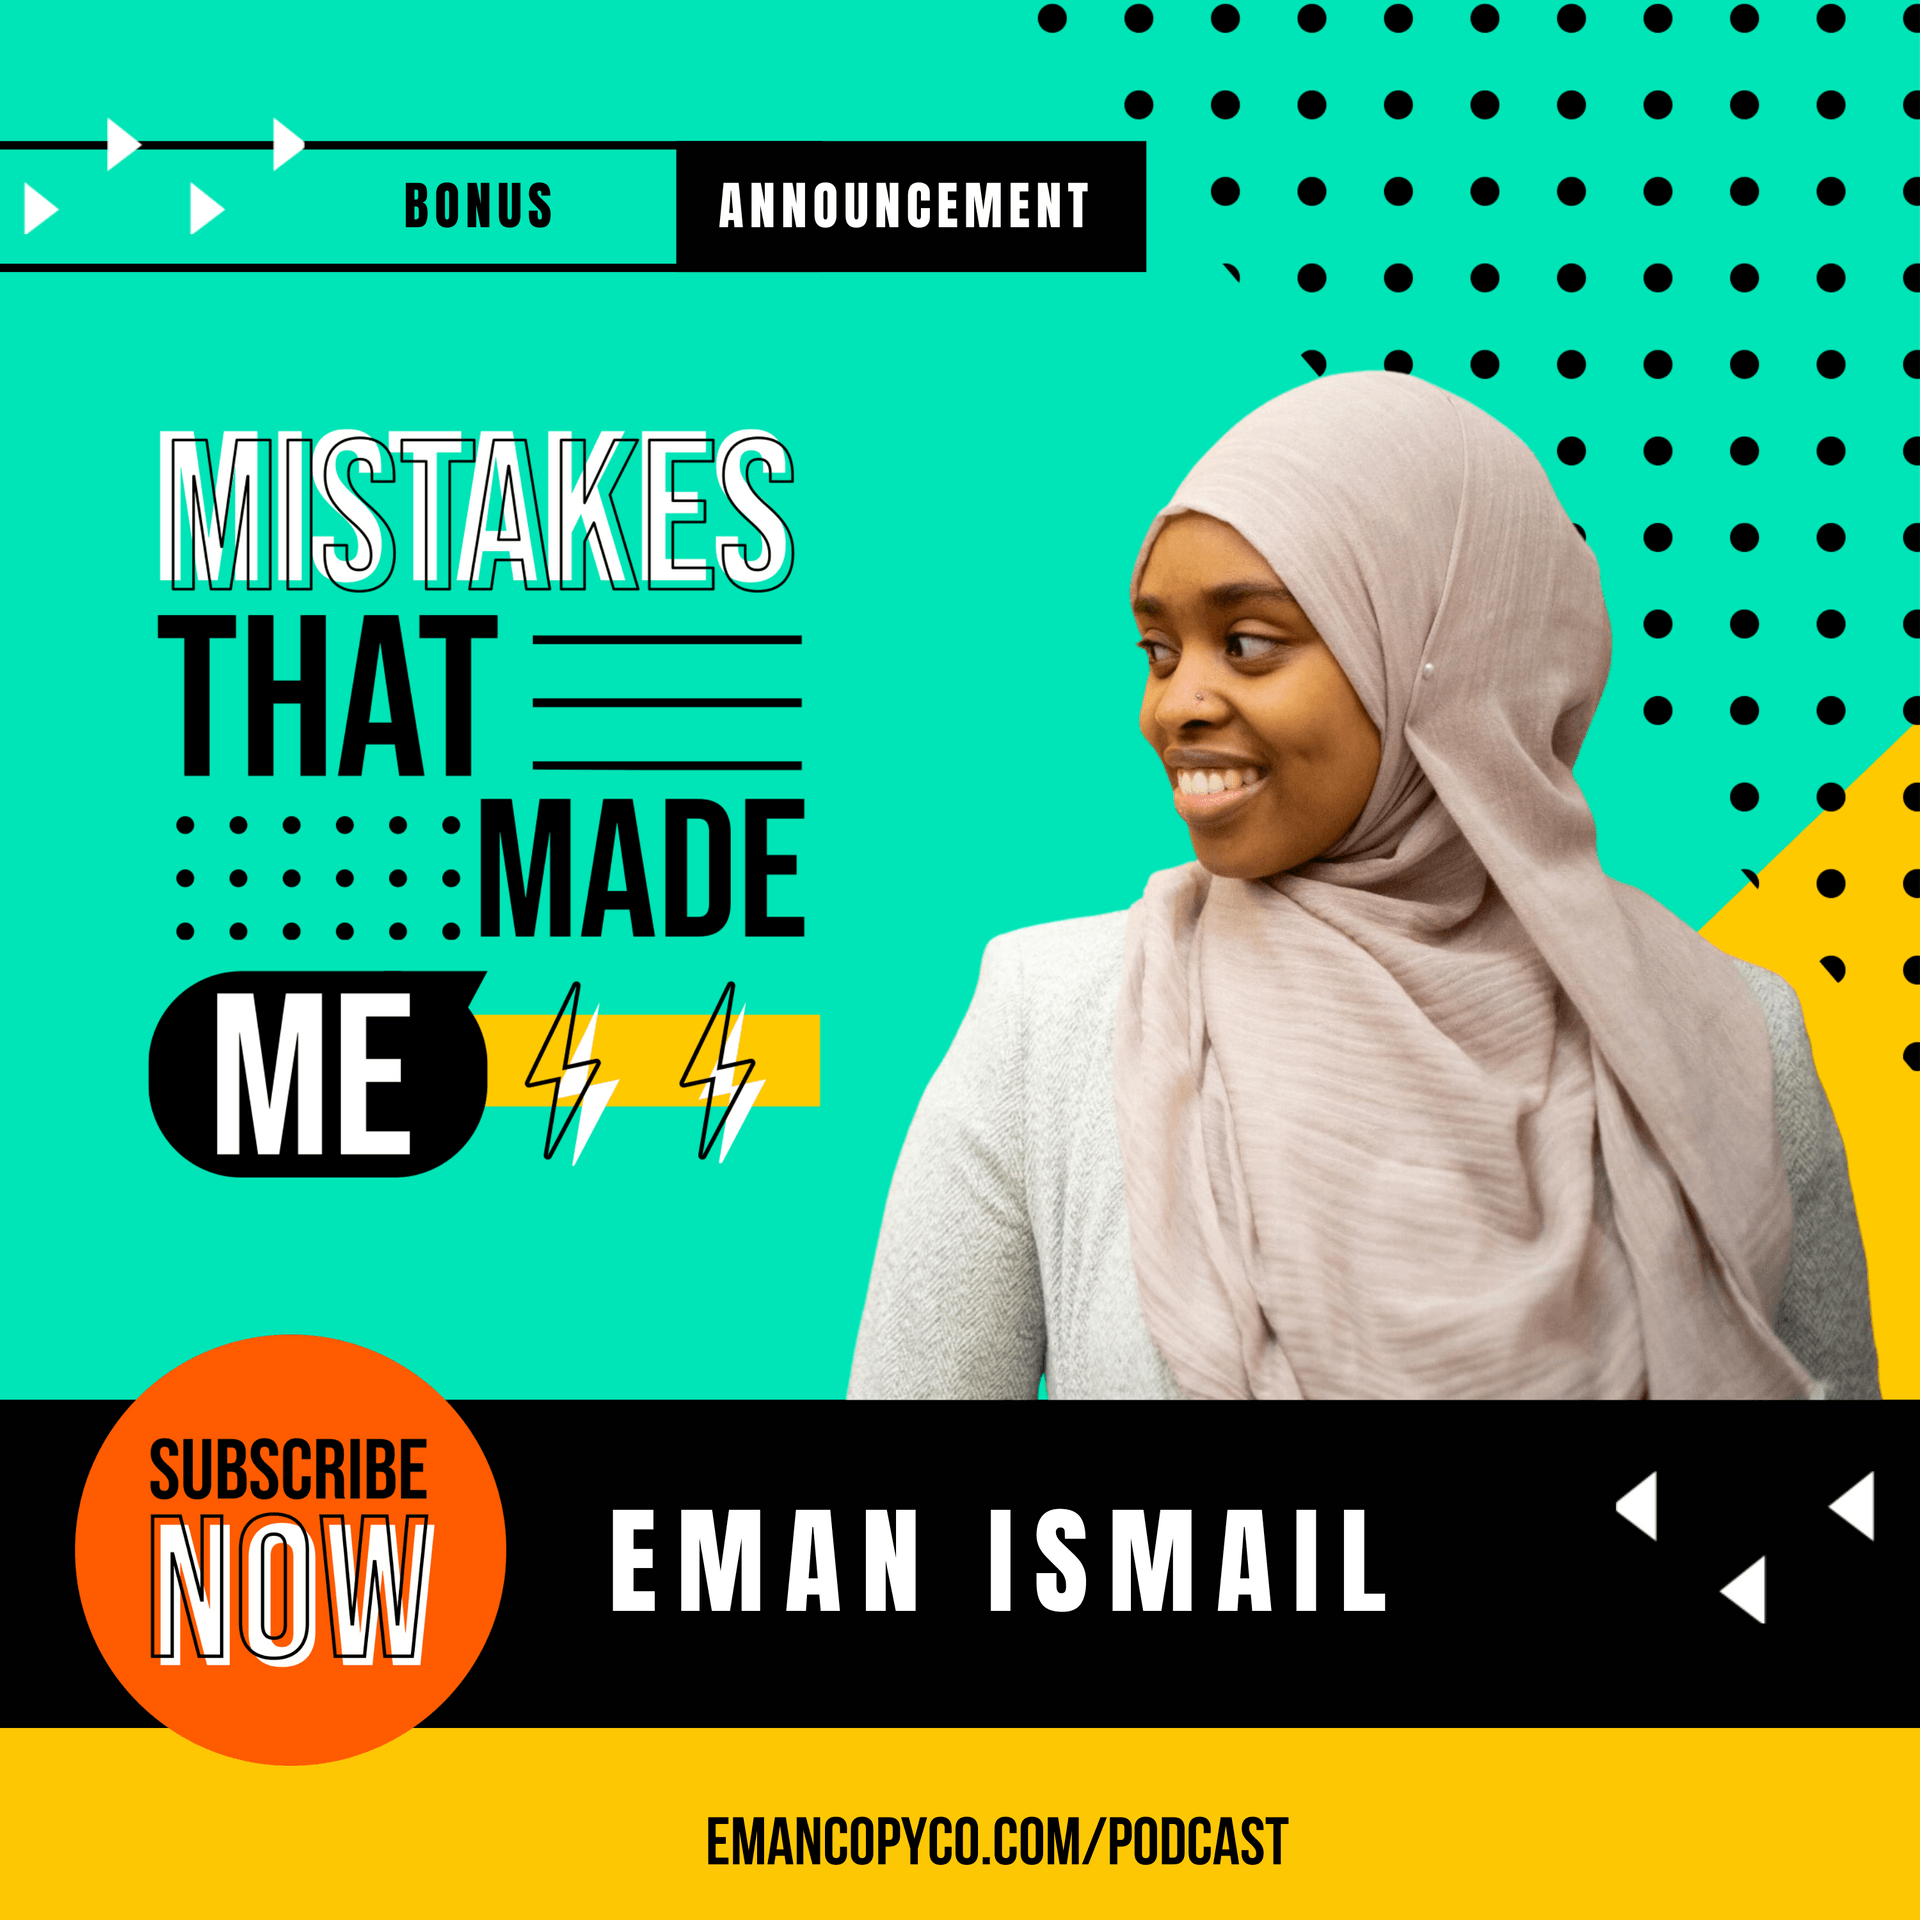 Episode cover for mistakes that made me with Eman Ismail